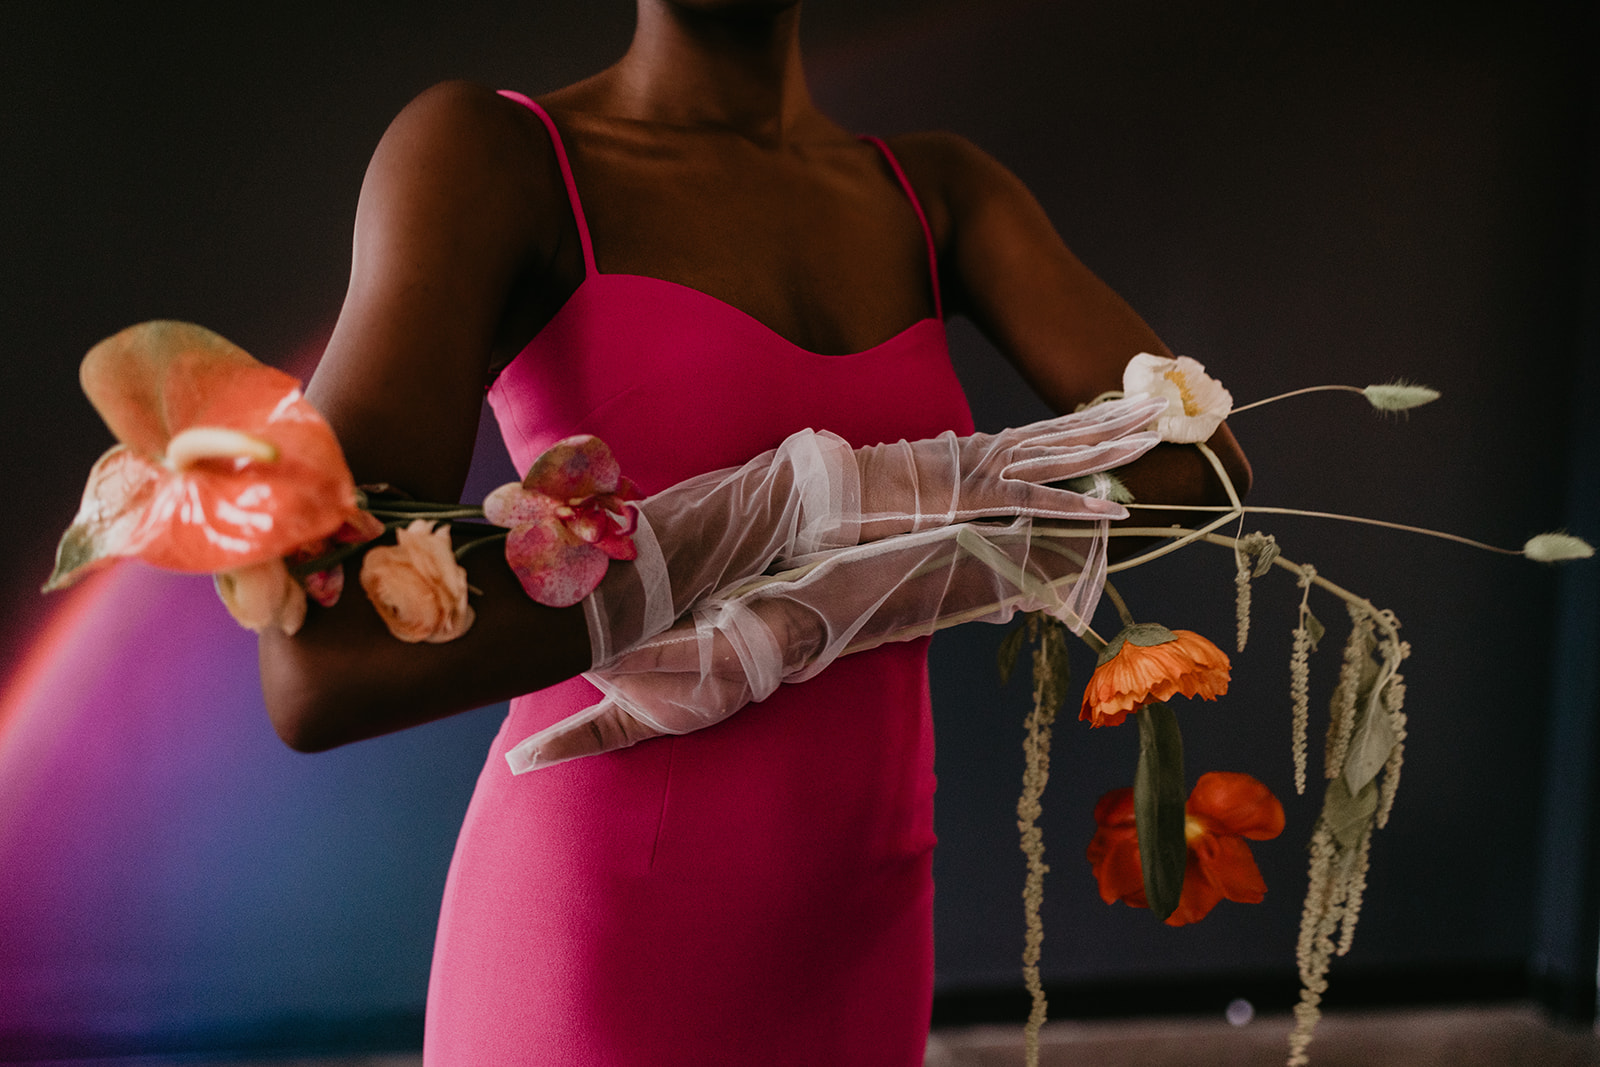 floral filled bridal gloves for an avante garde fashion look. 